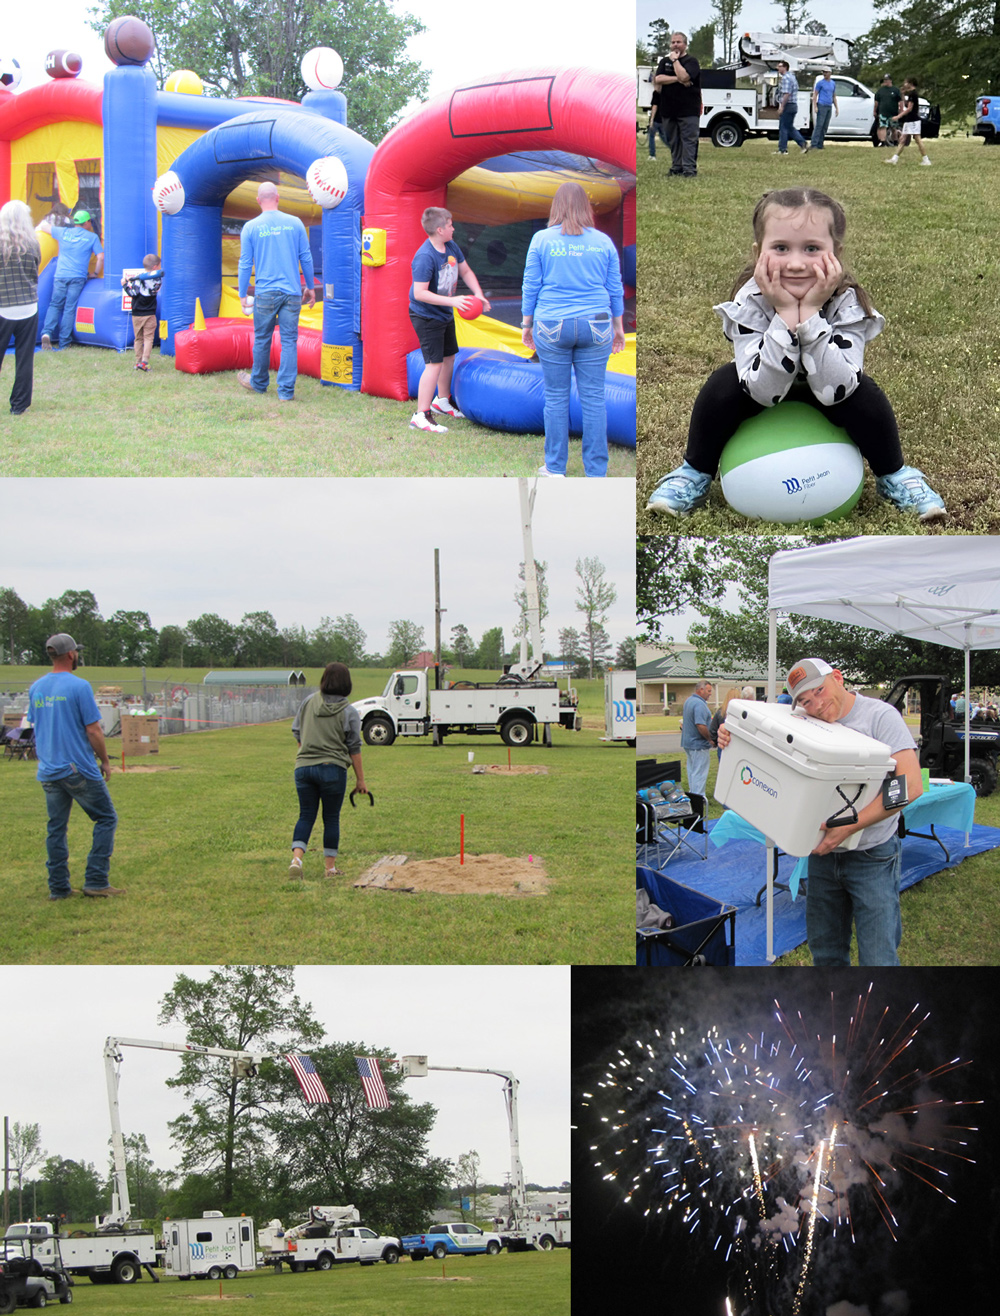 Various photos taken from the Fiber, Fireworks, Food and Fun event